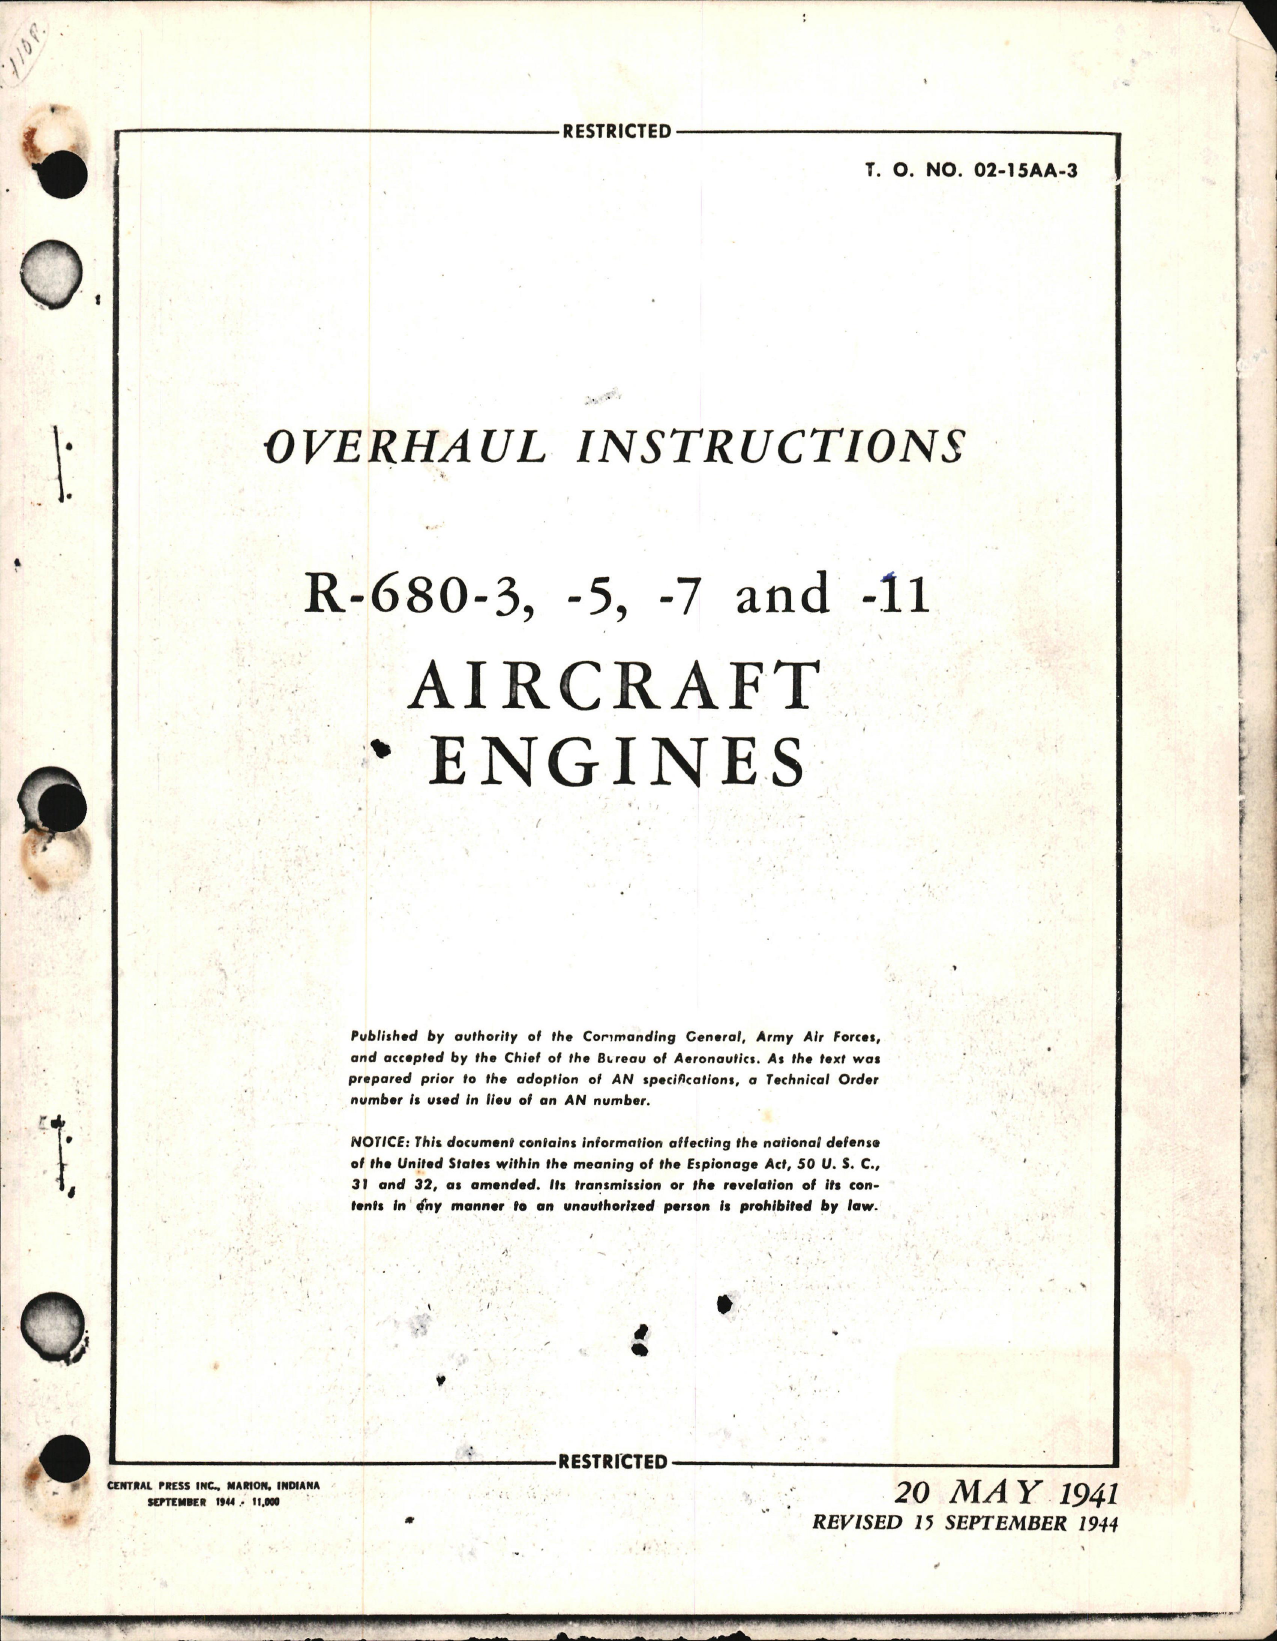 Sample page 1 from AirCorps Library document: Overhaul Instructions for R-680-3, -5, -7, and -11 Engines